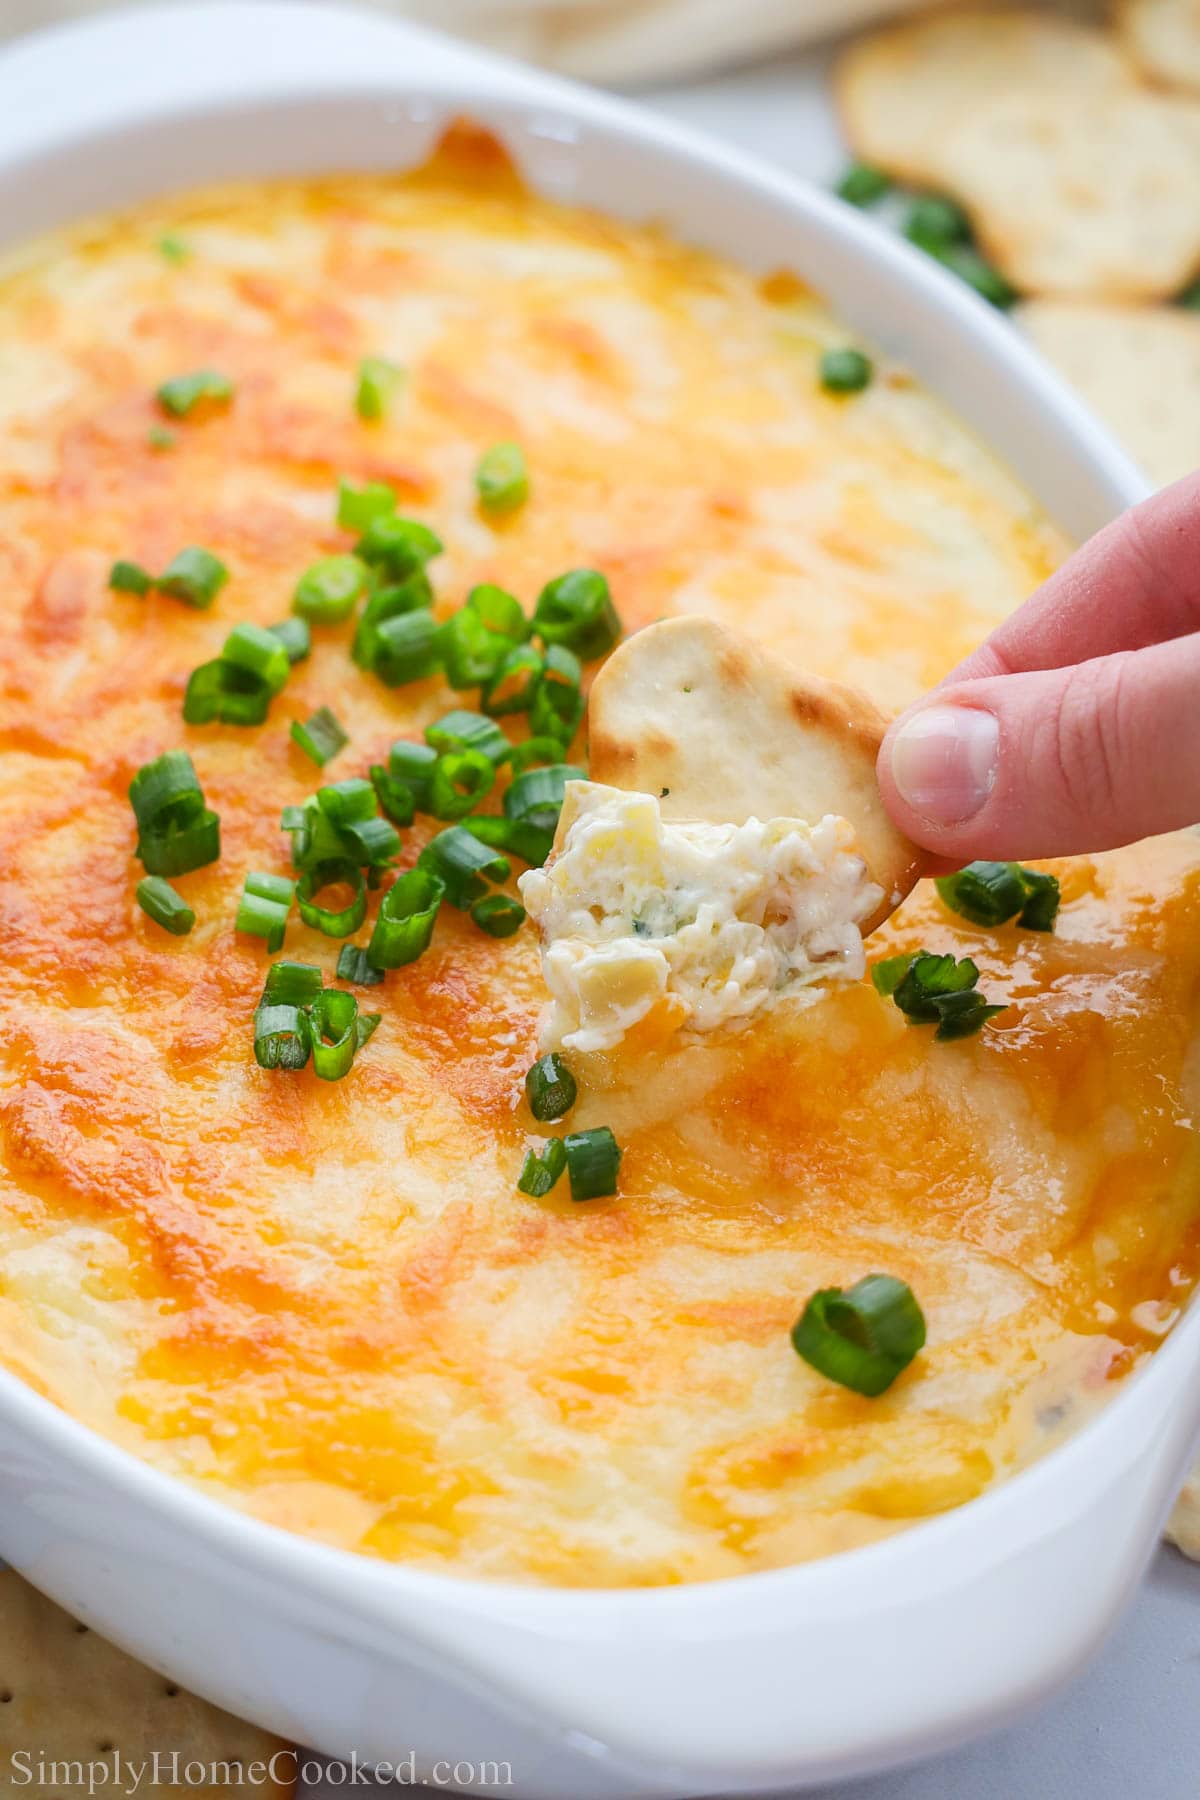 Crab Artichoke Dip topped with green onions and a chip being dipped into it.